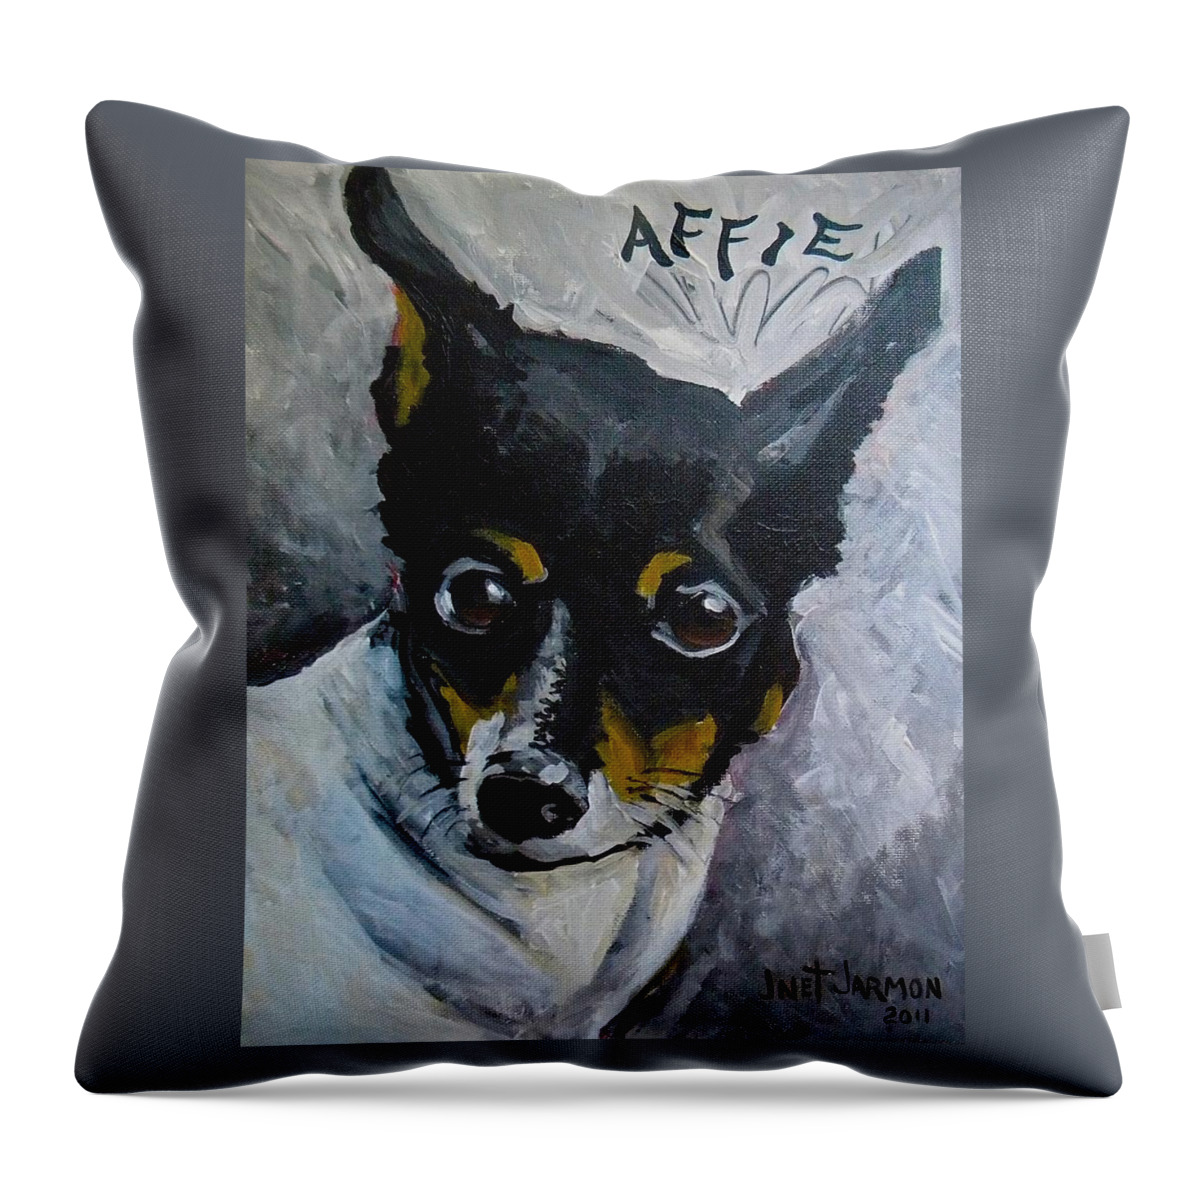 Dog Throw Pillow featuring the painting Affie by Jeanette Jarmon